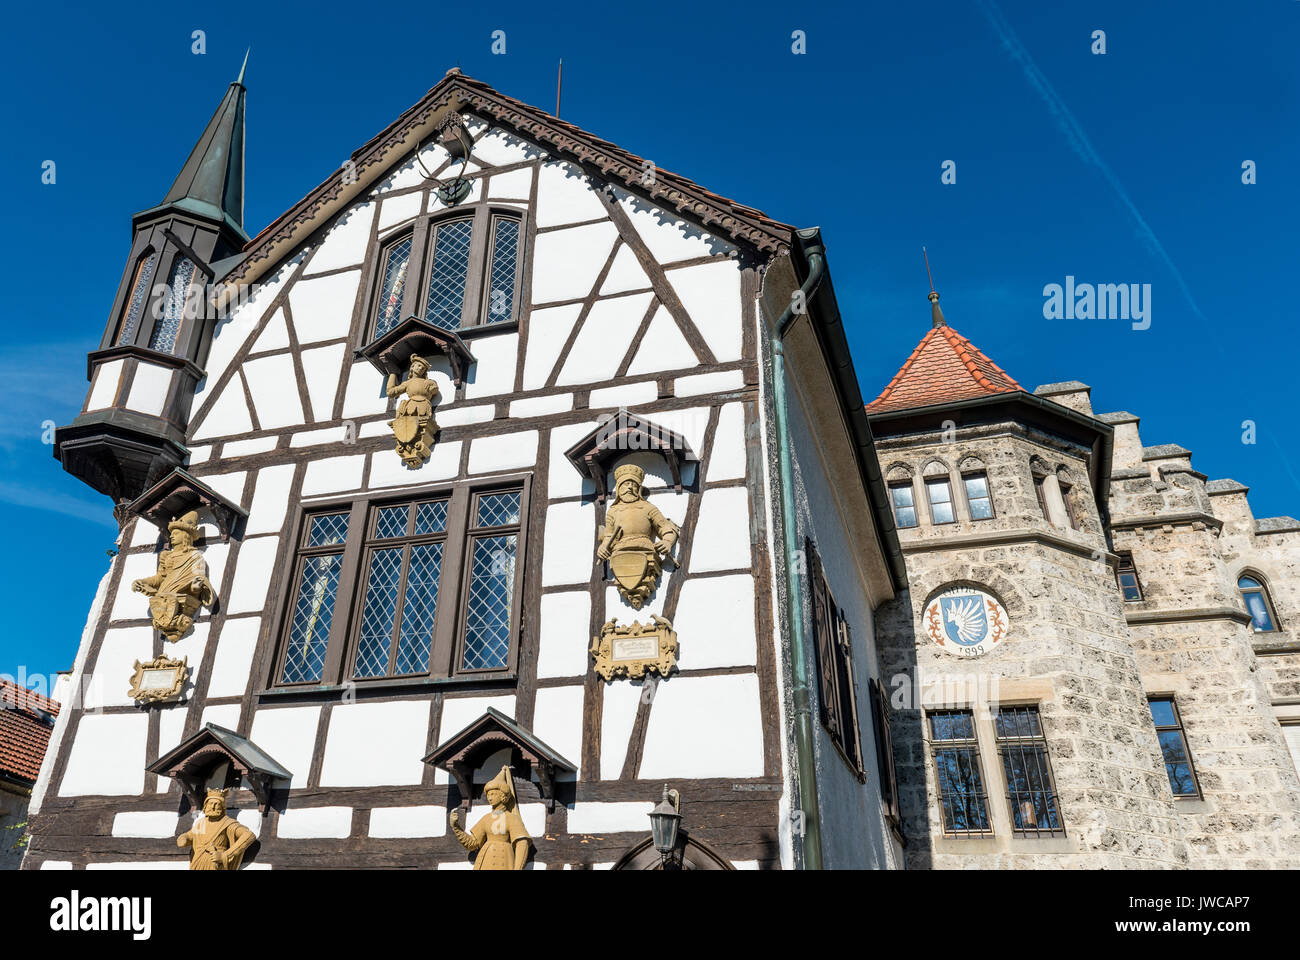 Half-half-timbered house house, medieval gables and roof, Lichtenstein Castle, Baden-Württemberg, Germany Stock Photo